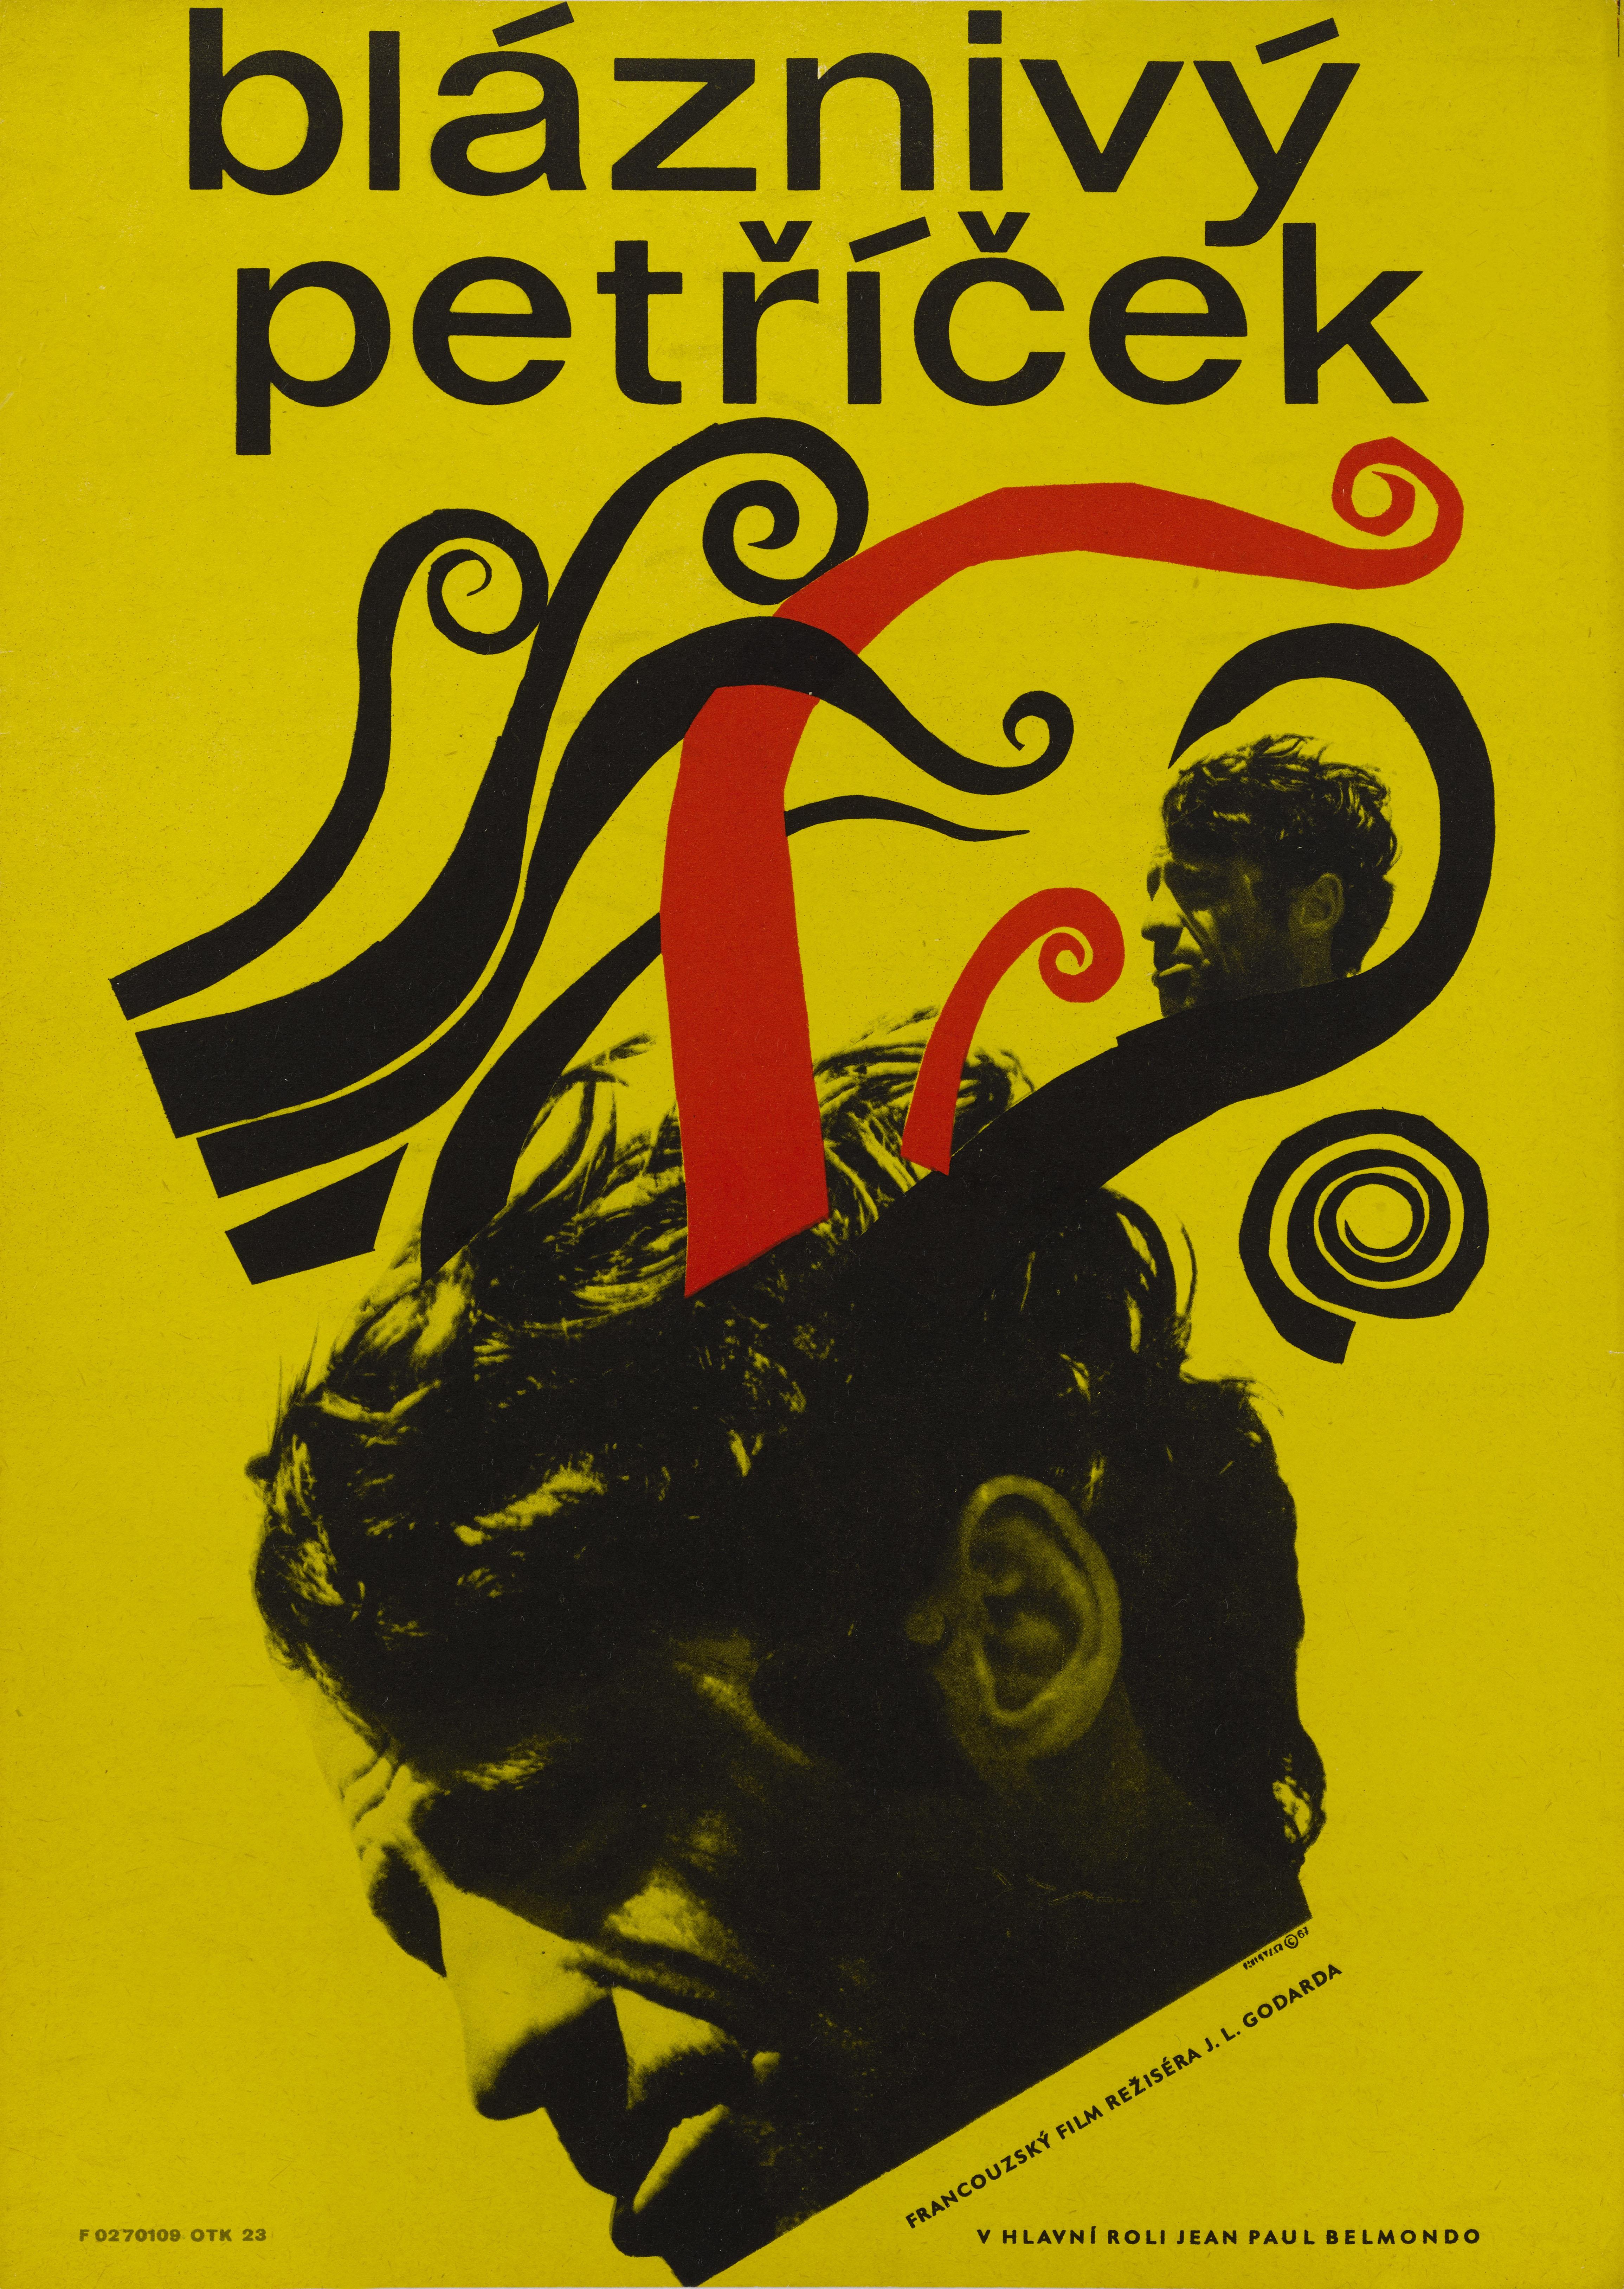 Original Czechoslovakian film poster for the 1965 French New Wave film Pierrot Le Fou.
The film was directed by Jean-Luc Godard and starred Jean-Paul Belmondo.
This extremely cool poster was designed by the Czech artist Jirí Hilmar (b. 1937)
This